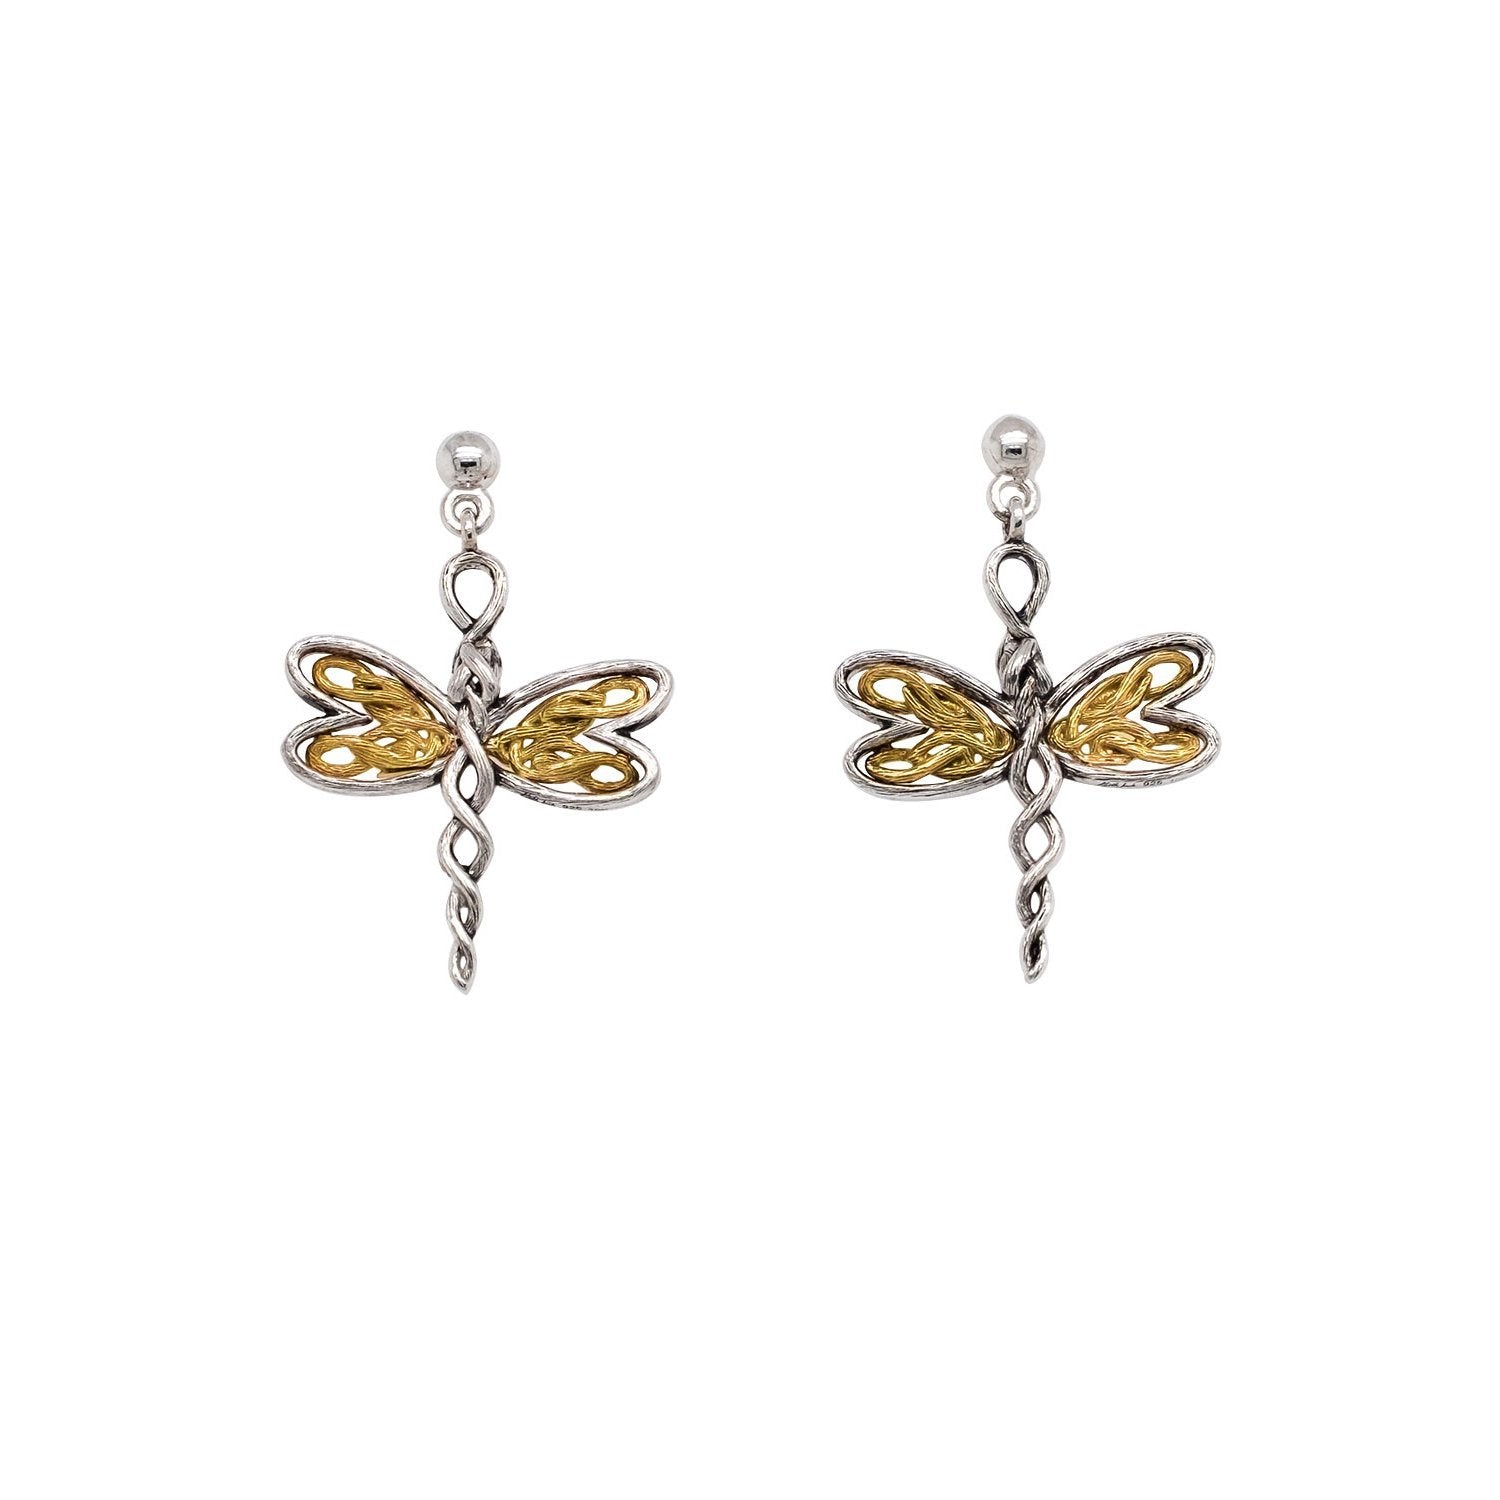 Dragonfly Post Earrings - Sterling Silver / Dark Rhodium and 10k Gold and White Cubic Zirconia